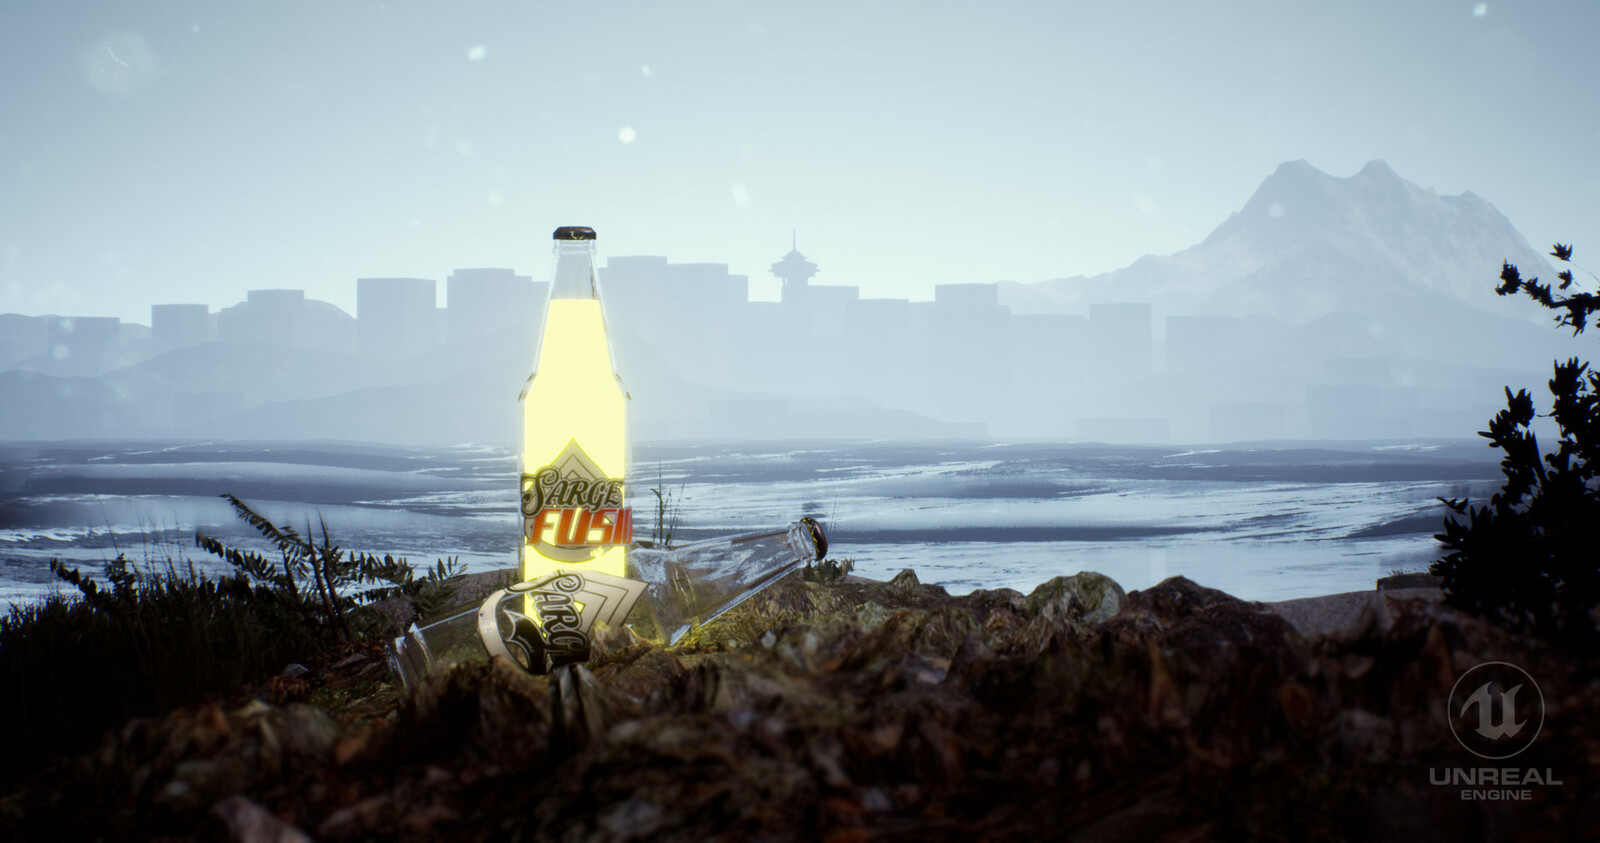 Sarge Soda Assets in Unreal Engine 4 Environment